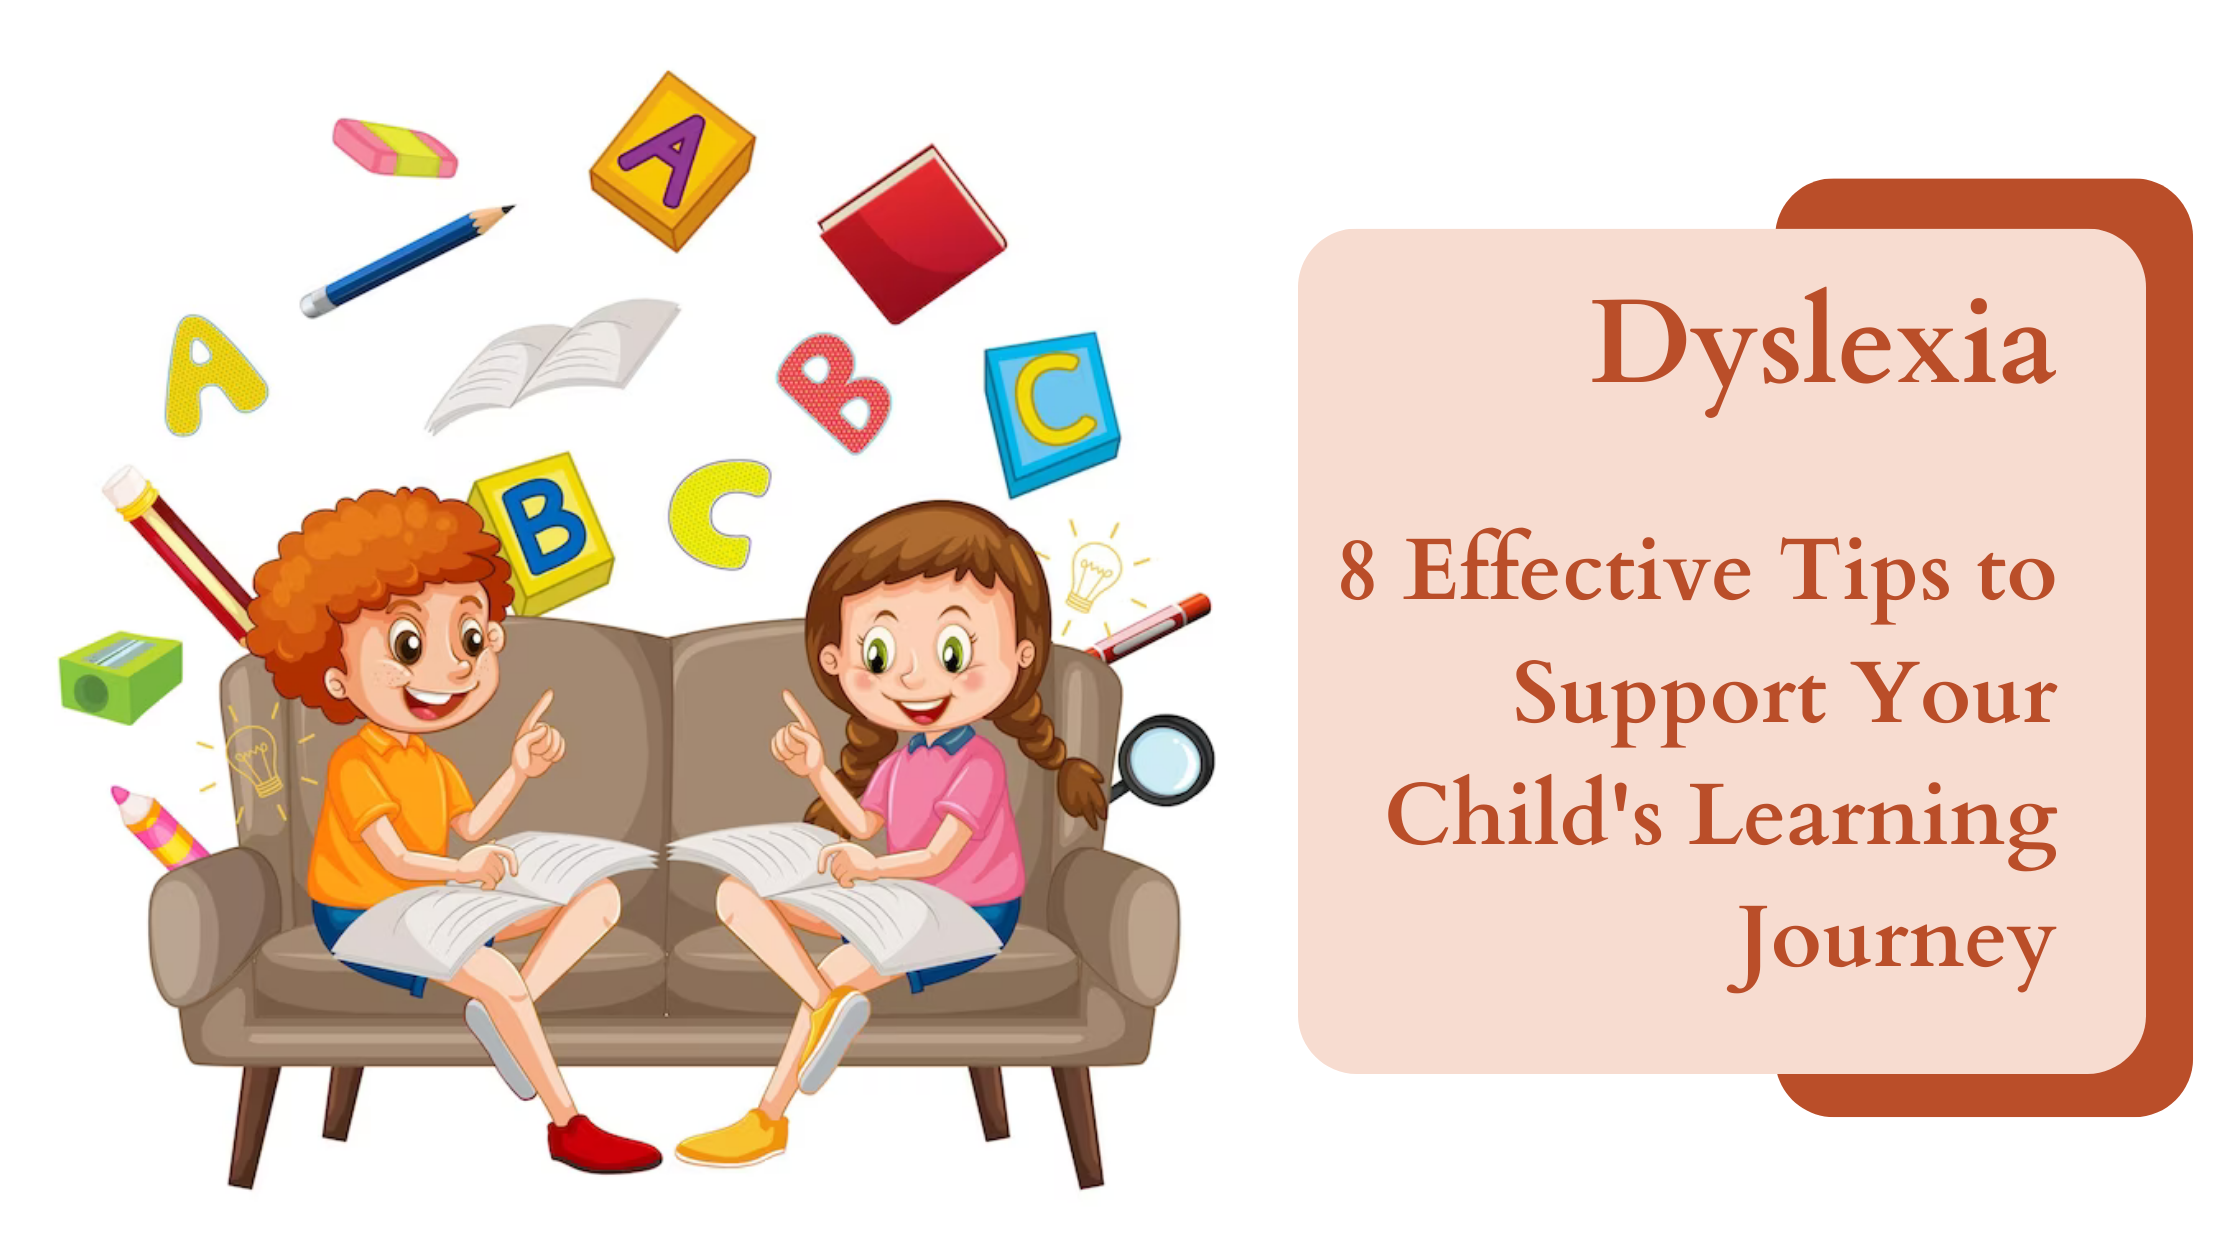 Dyslexia: 8 Effective Tips to Support Your Child's Learning Journey